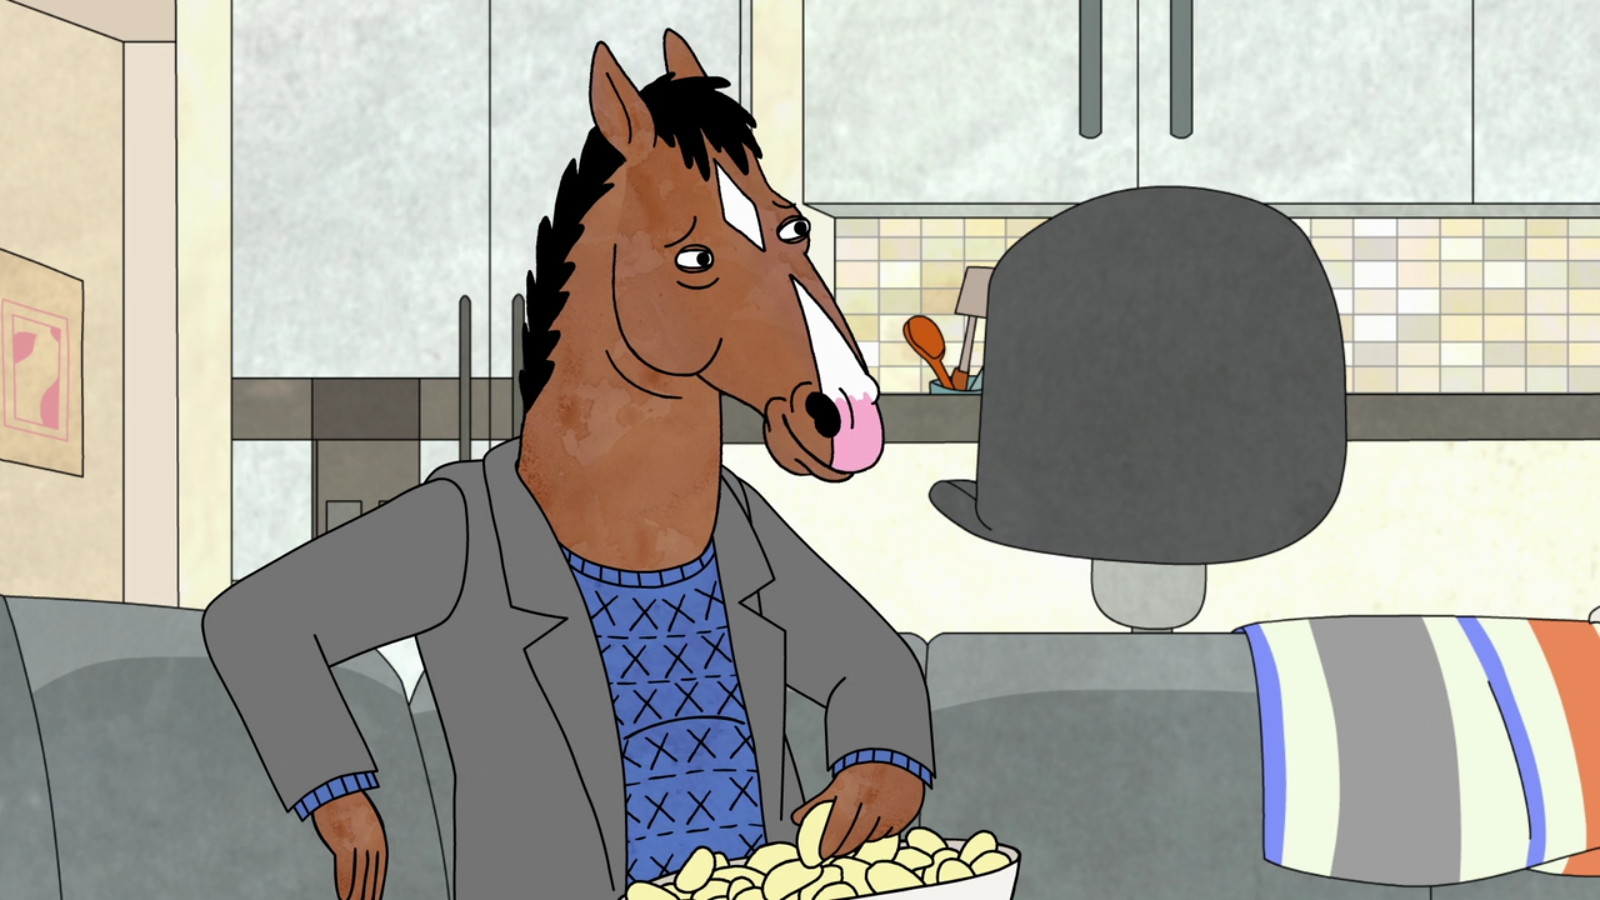 Rating and Reviewing every episode of BoJack Horseman.